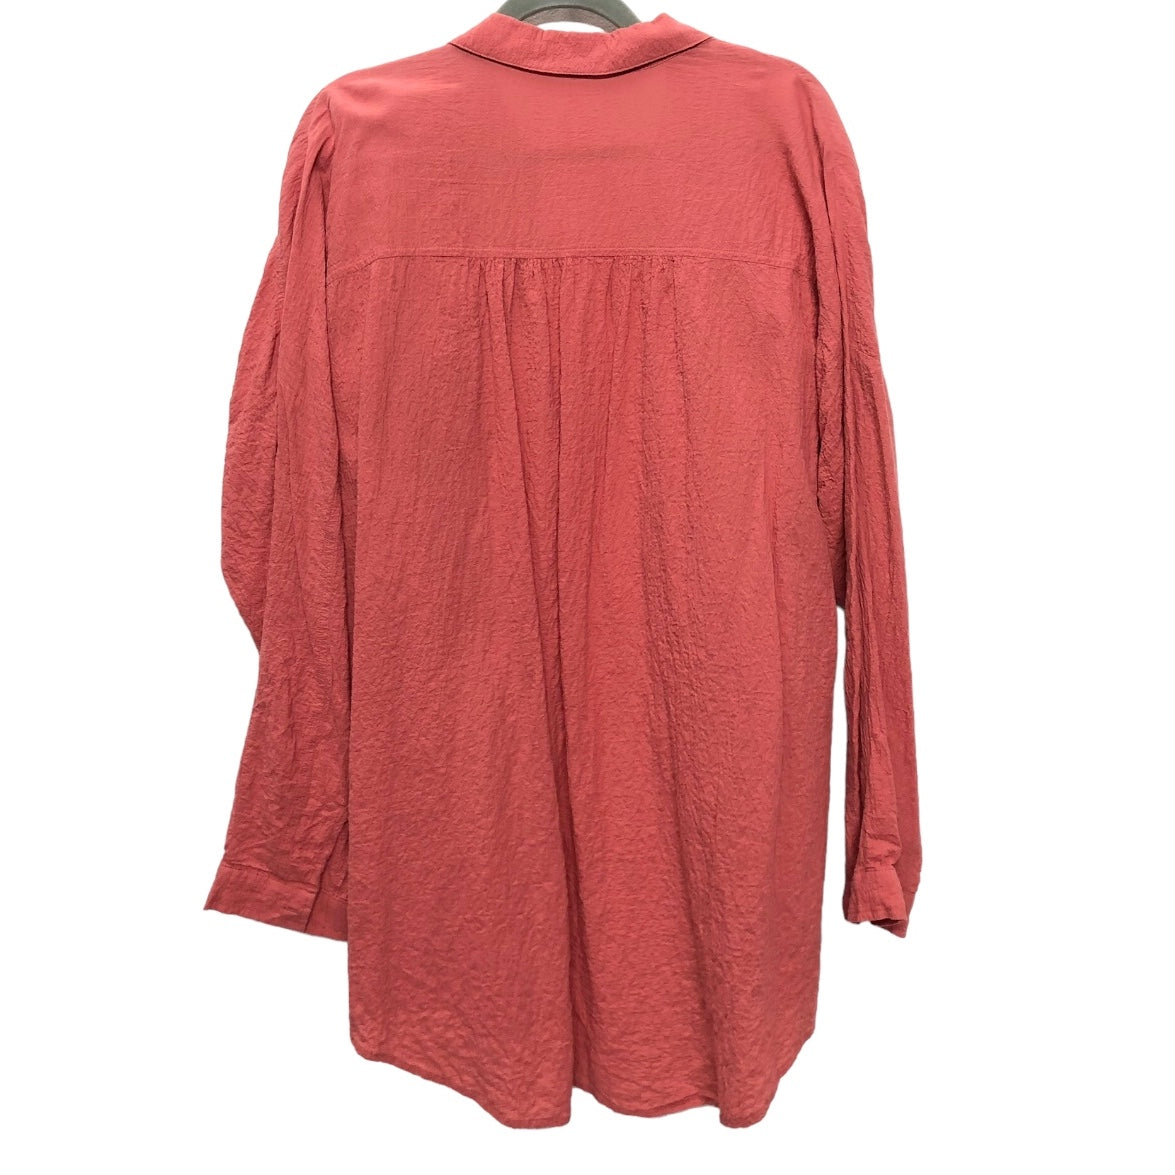 Red Top Long Sleeve Free People, Size M